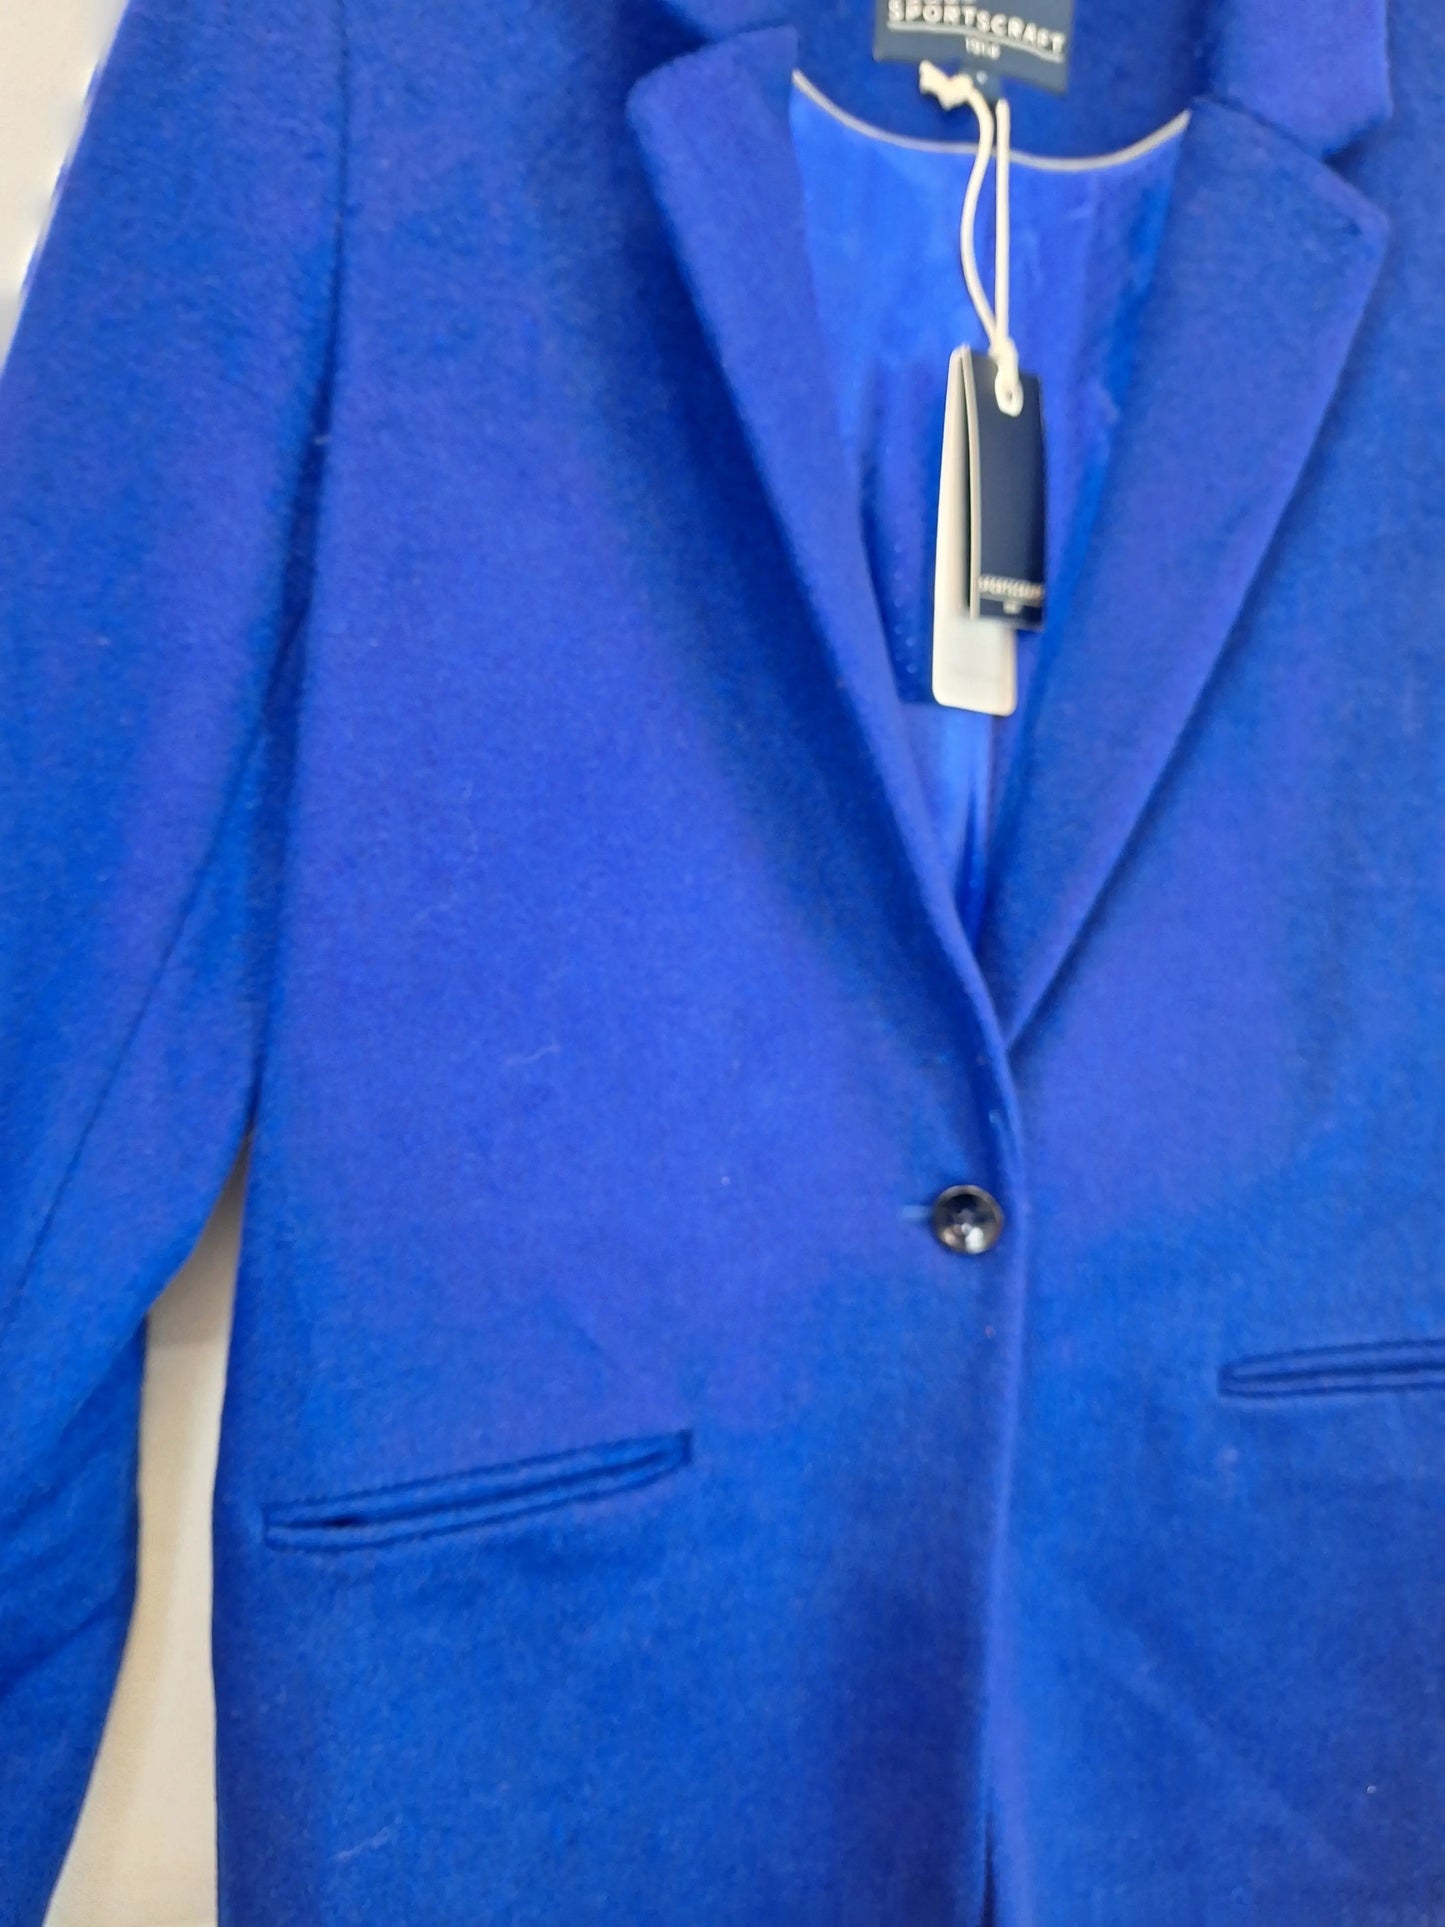 Sportscraft Sophisticated Cobalt Melton Coat Size 6 by SwapUp-Online Second Hand Store-Online Thrift Store